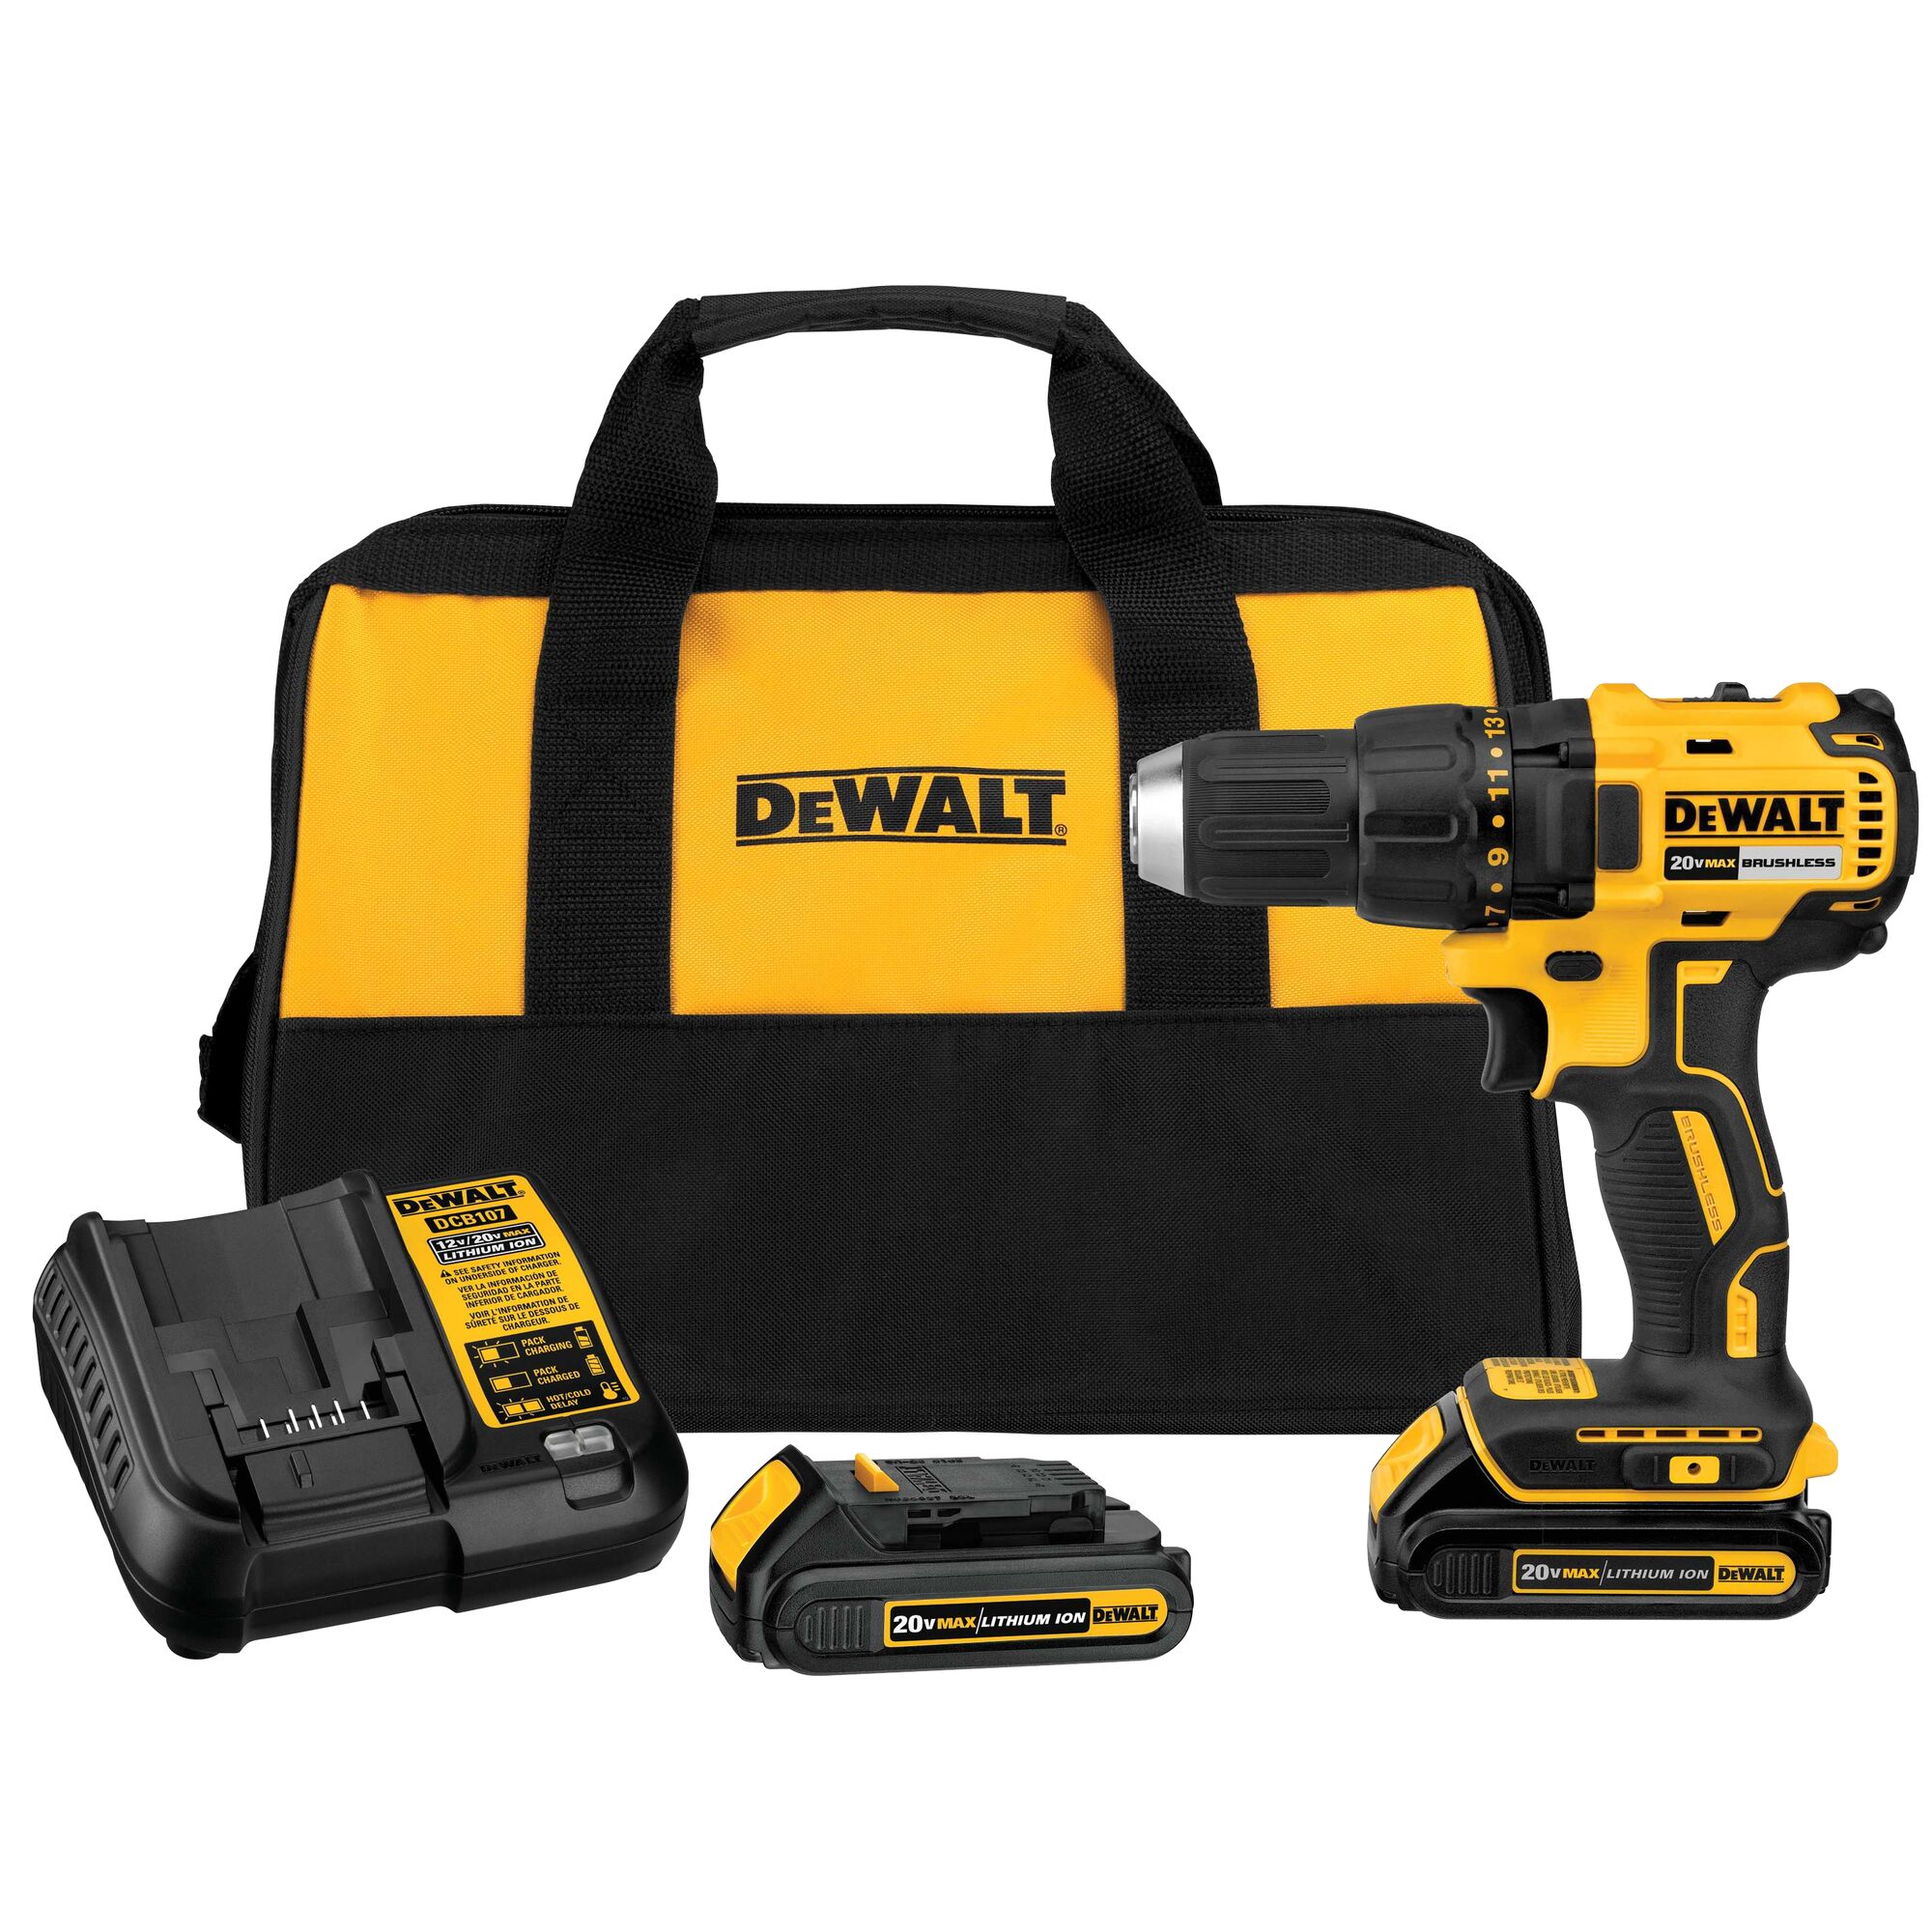 DEWALT 20-volt Max 1/2-in Brushless Cordless Li-ion Batteries Included and Charger Included) at Lowes.com